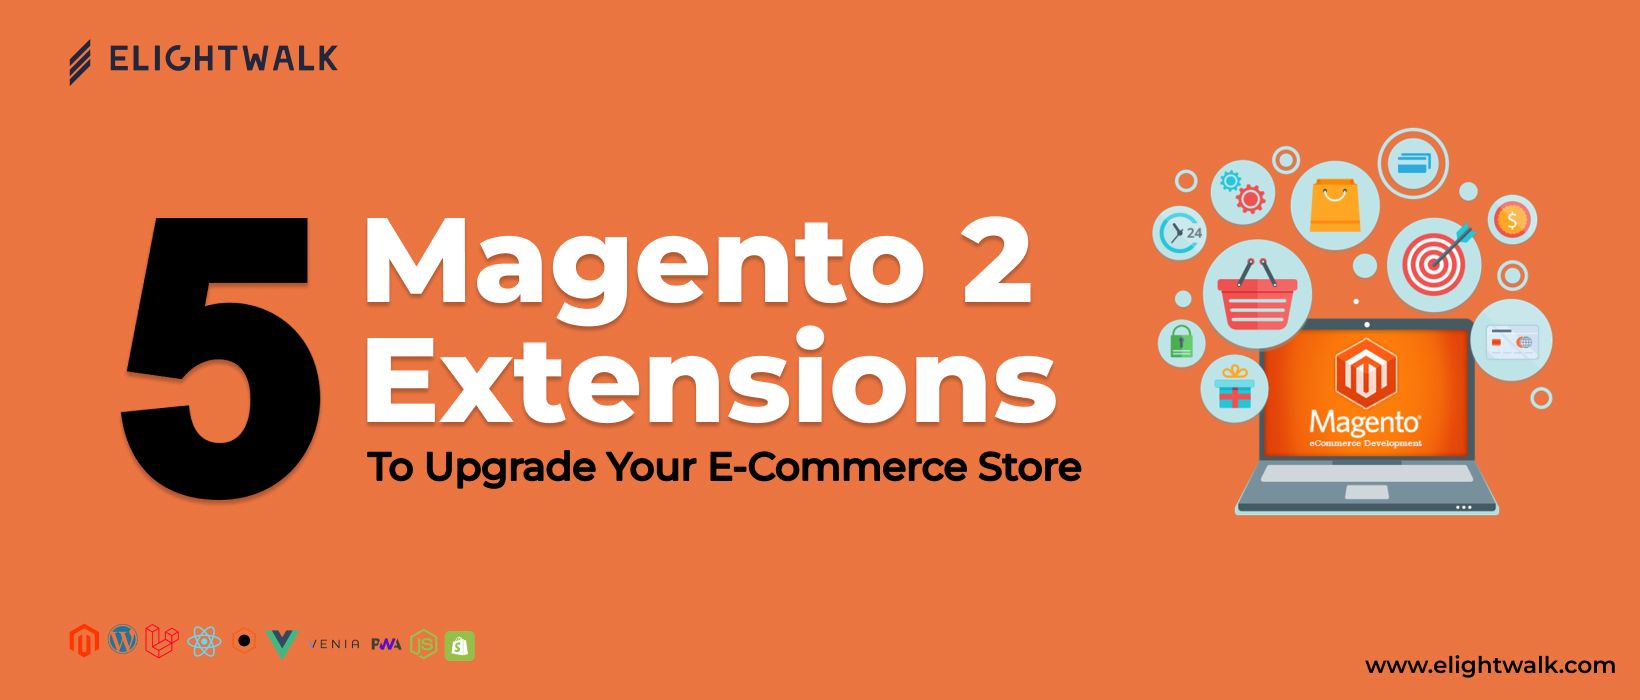 5 magento extension for update e-commerce store 